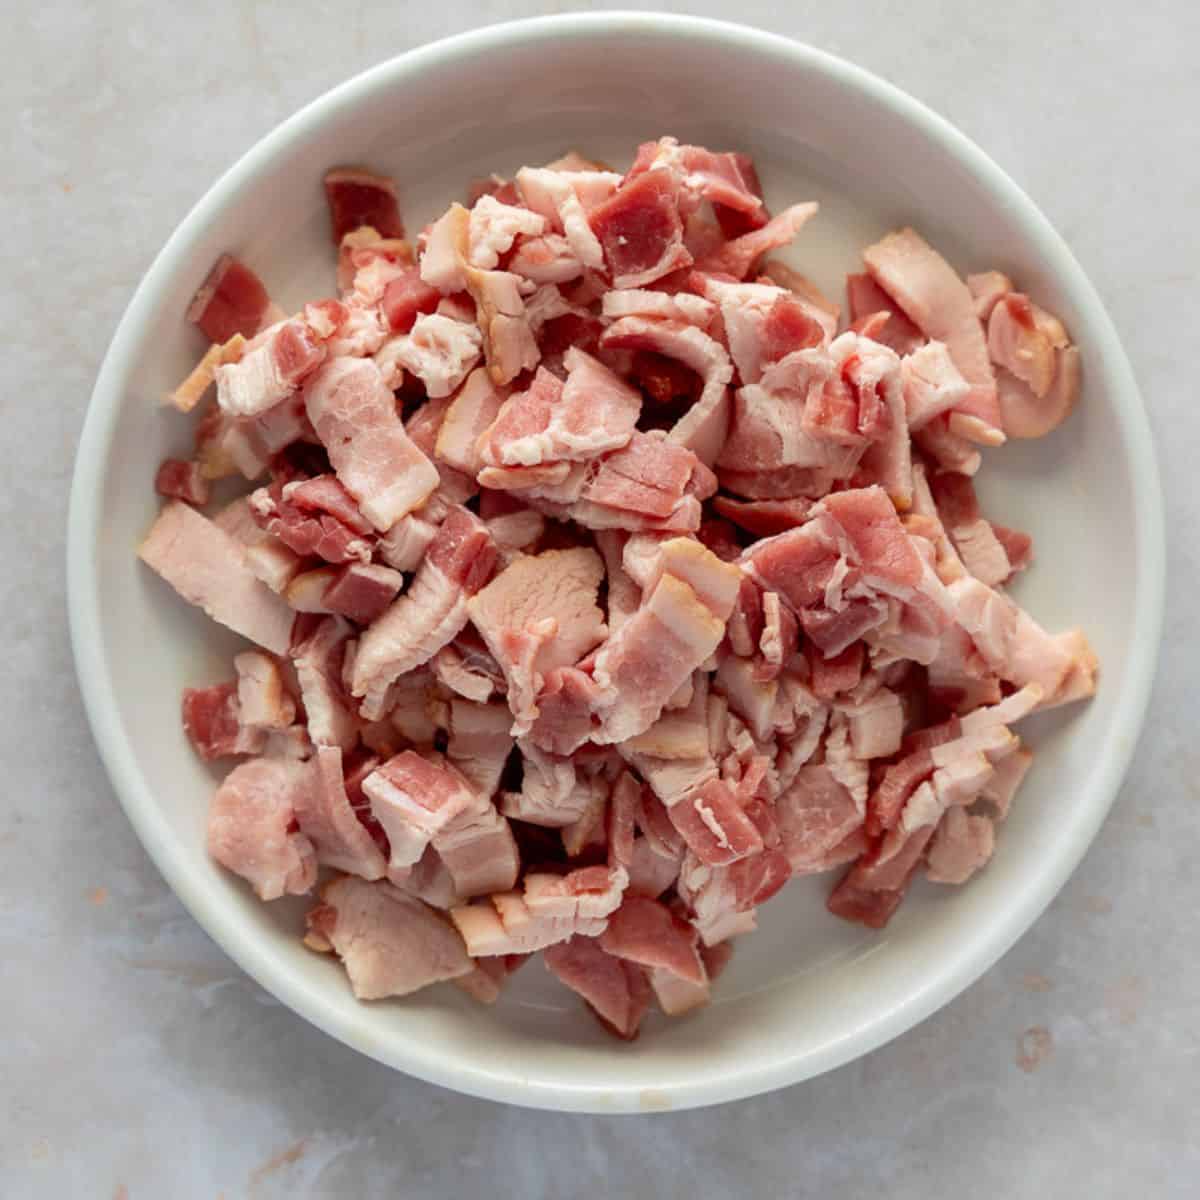 Uncooked diced bacon on a white plate.